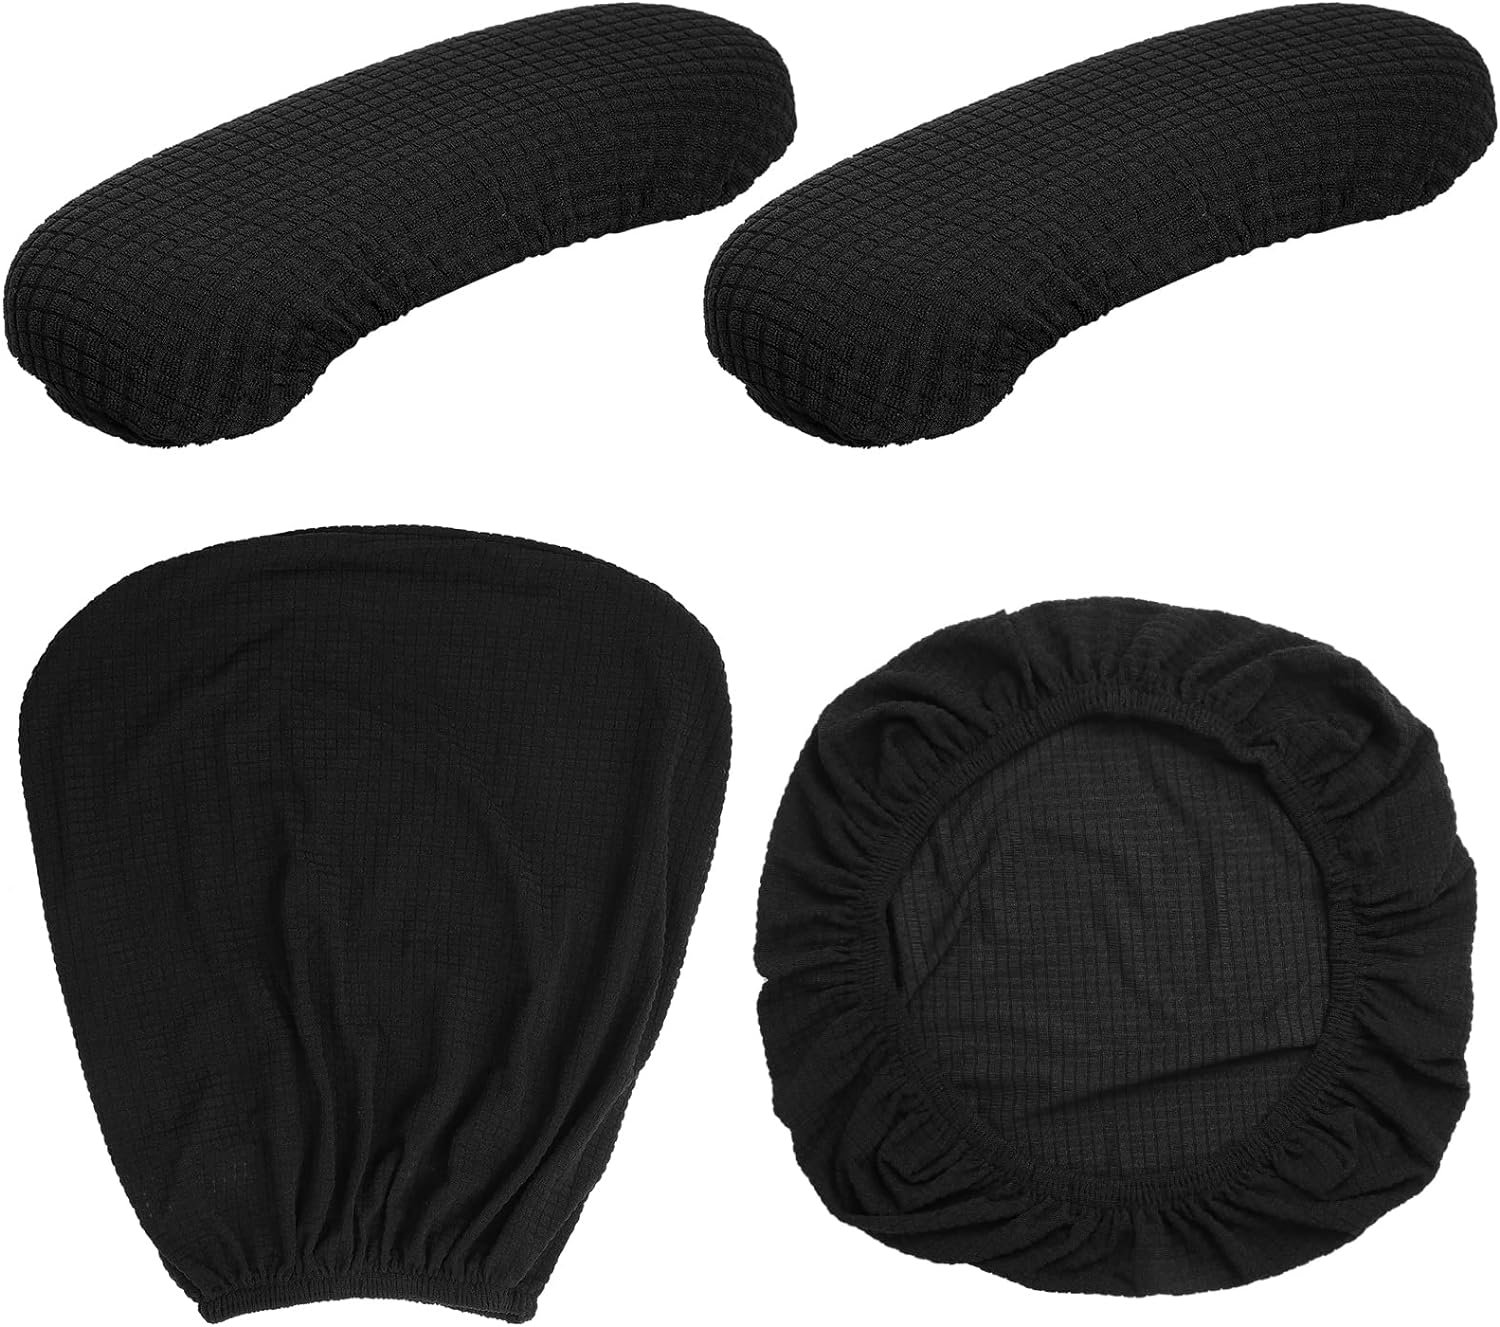 4 Pieces Computer Office Chair Covers Set Universal Protective  Stretchable Chair Seat Covers Desk Chair Armrest Covers Slipcovers Black Pads Office Cushion Backrest for Boss Rotating Chairs